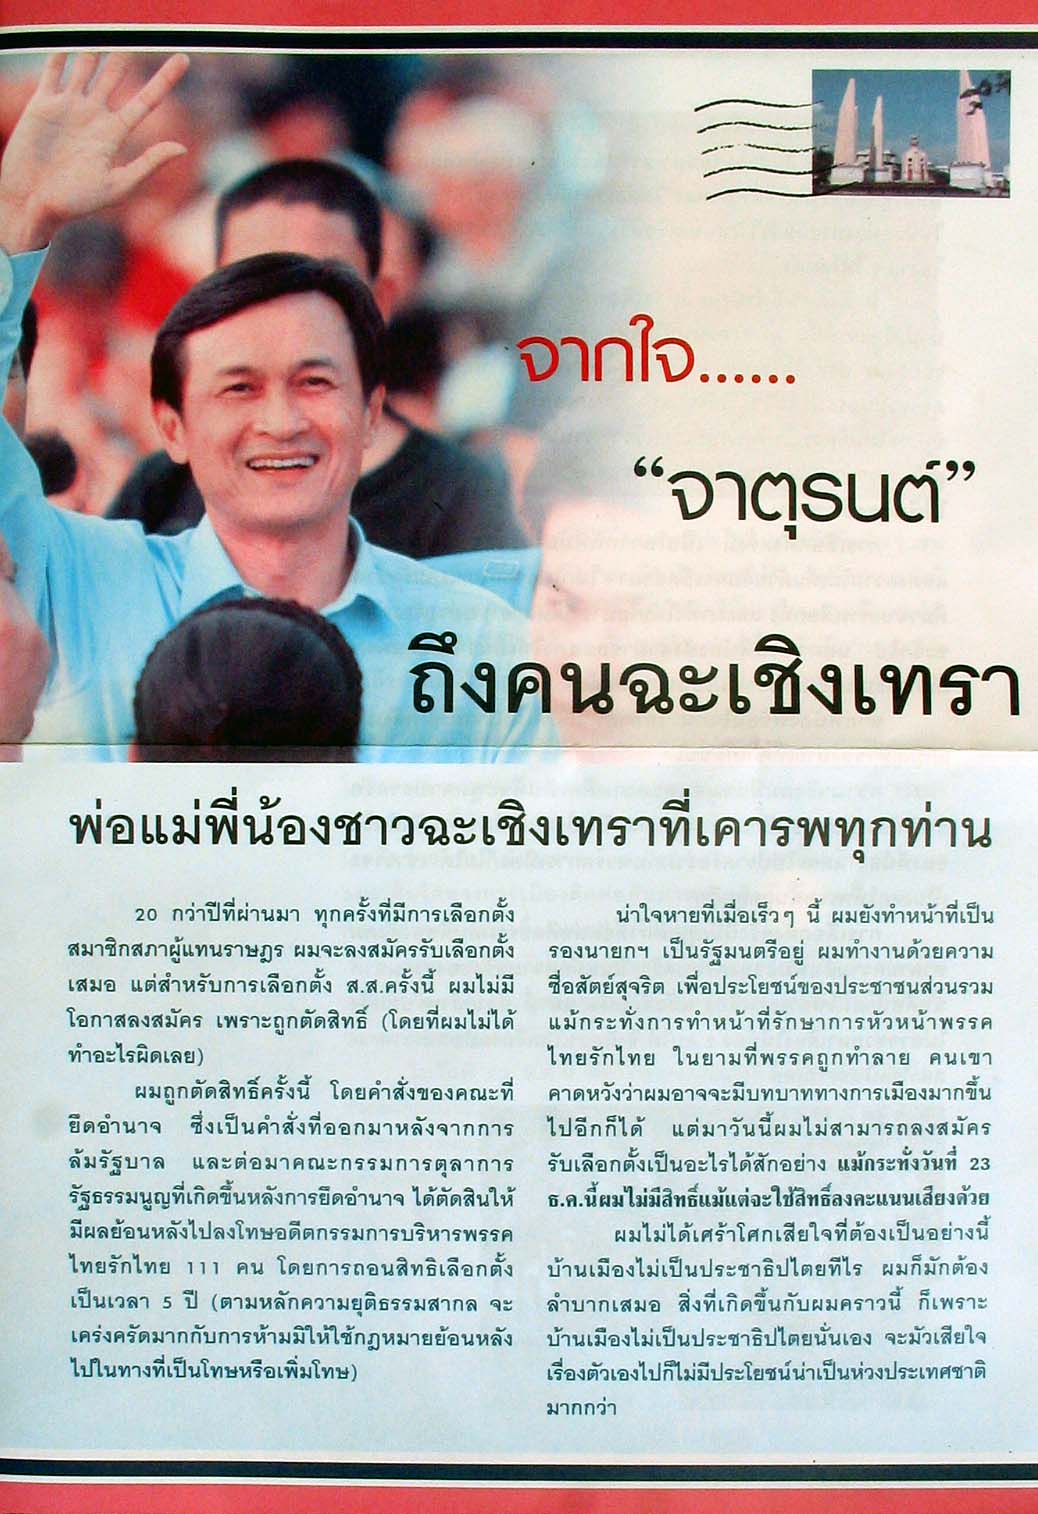 Michael H. Nelson, Chachoengsao province, Thailand election campaign, December 2007